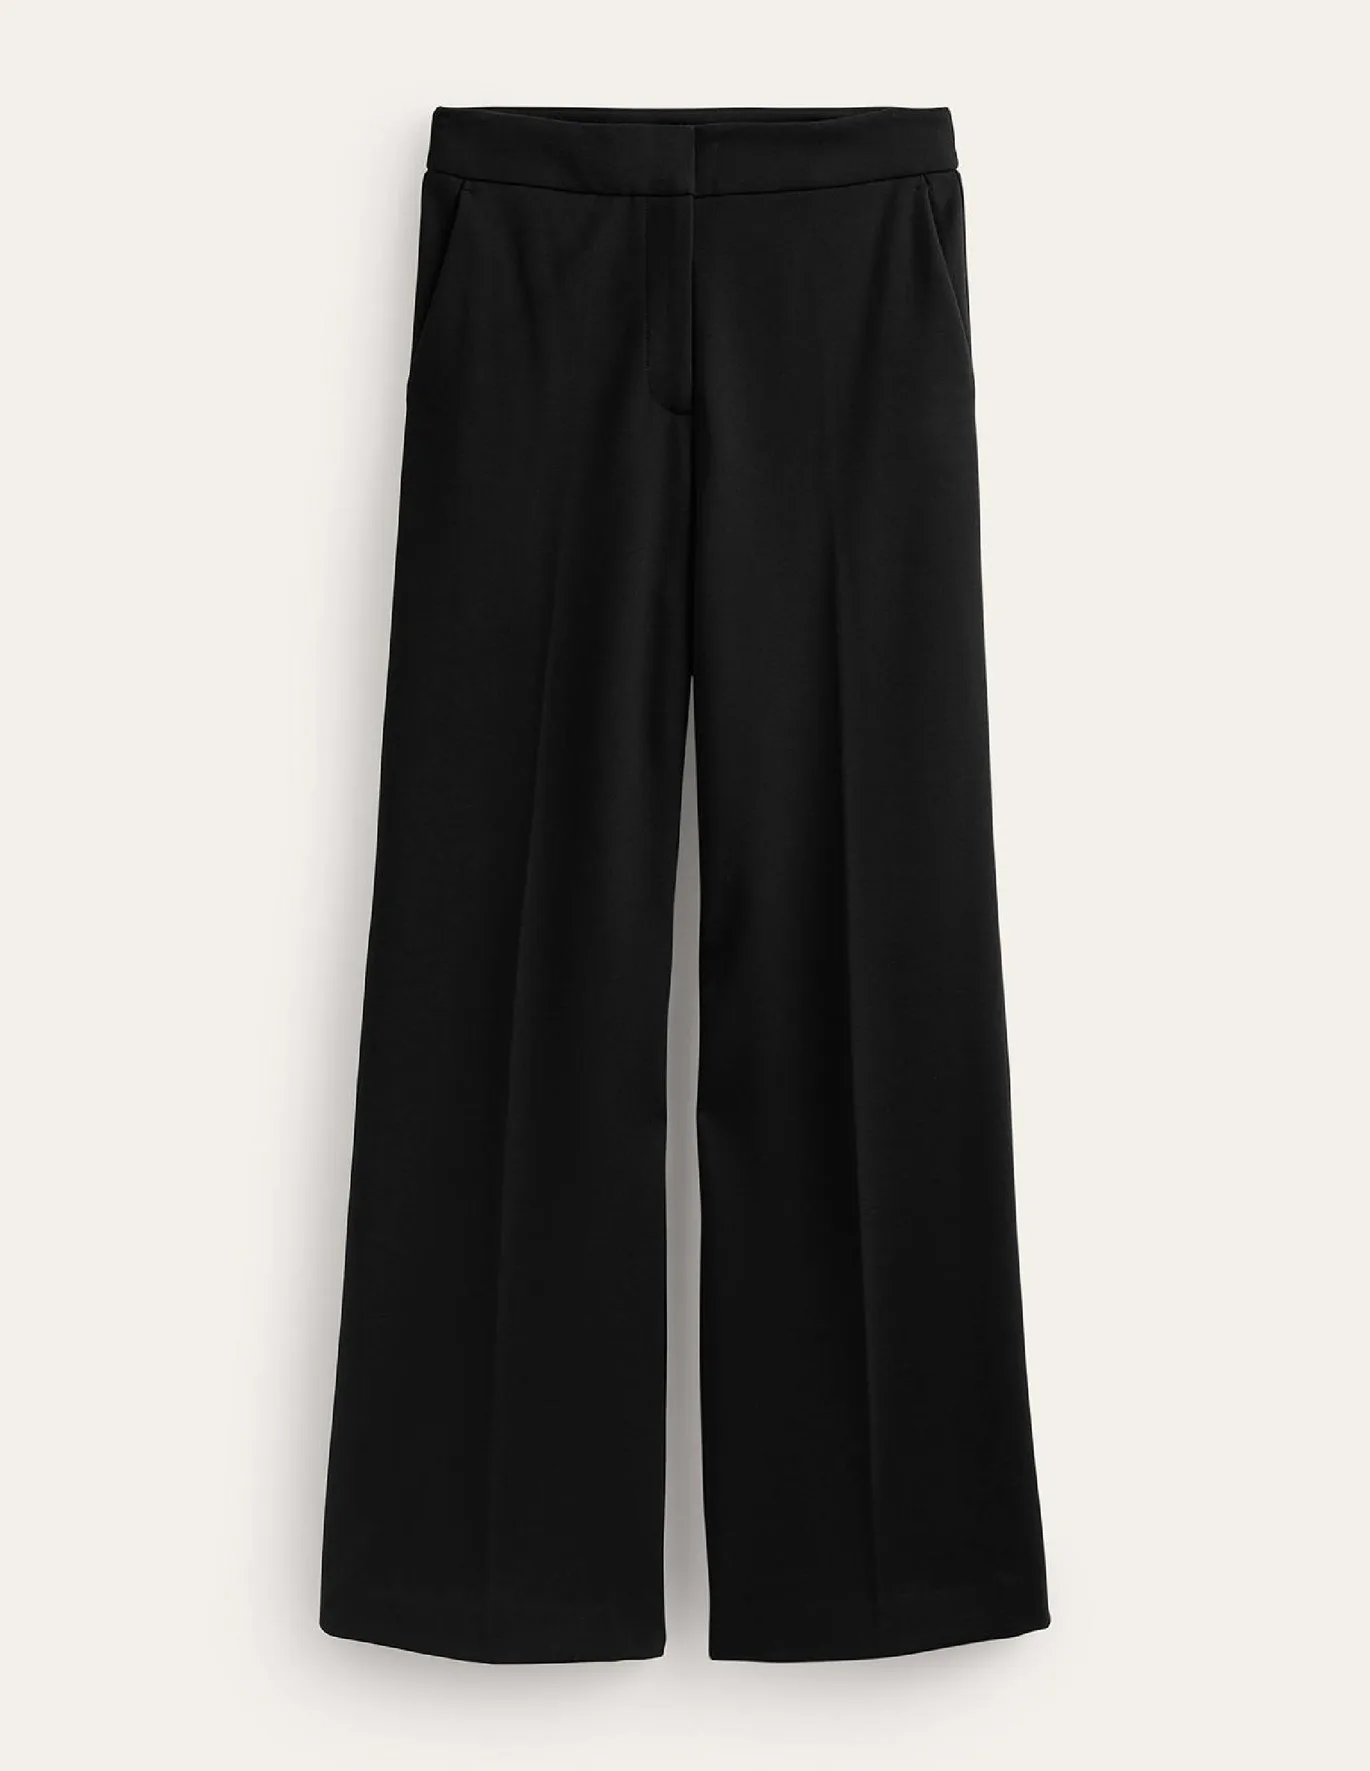 Boden + Westbourne Ponte Trousers in Black